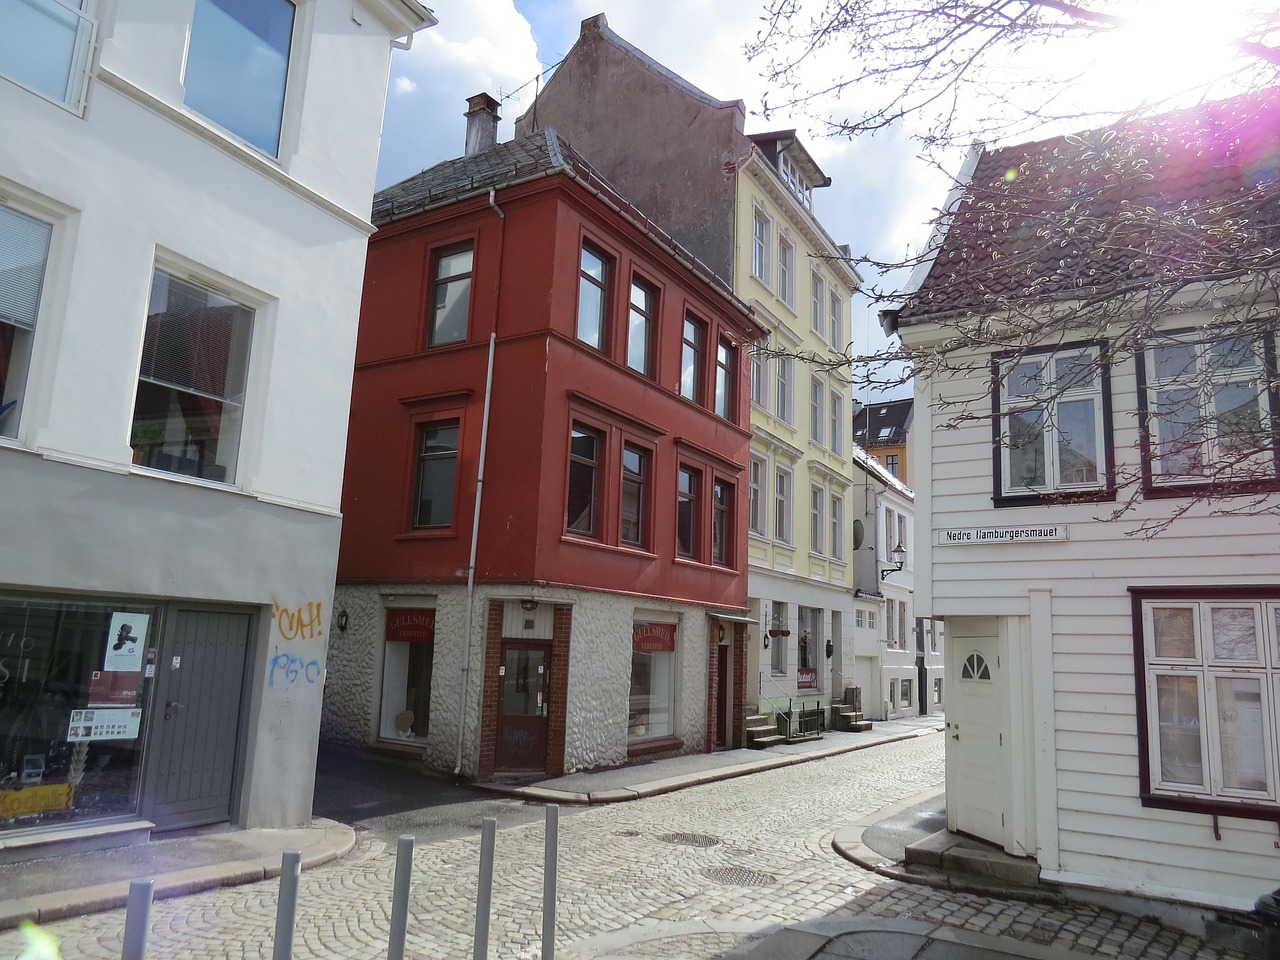 the road from bergen station nordic red house quiet bergen street free photo